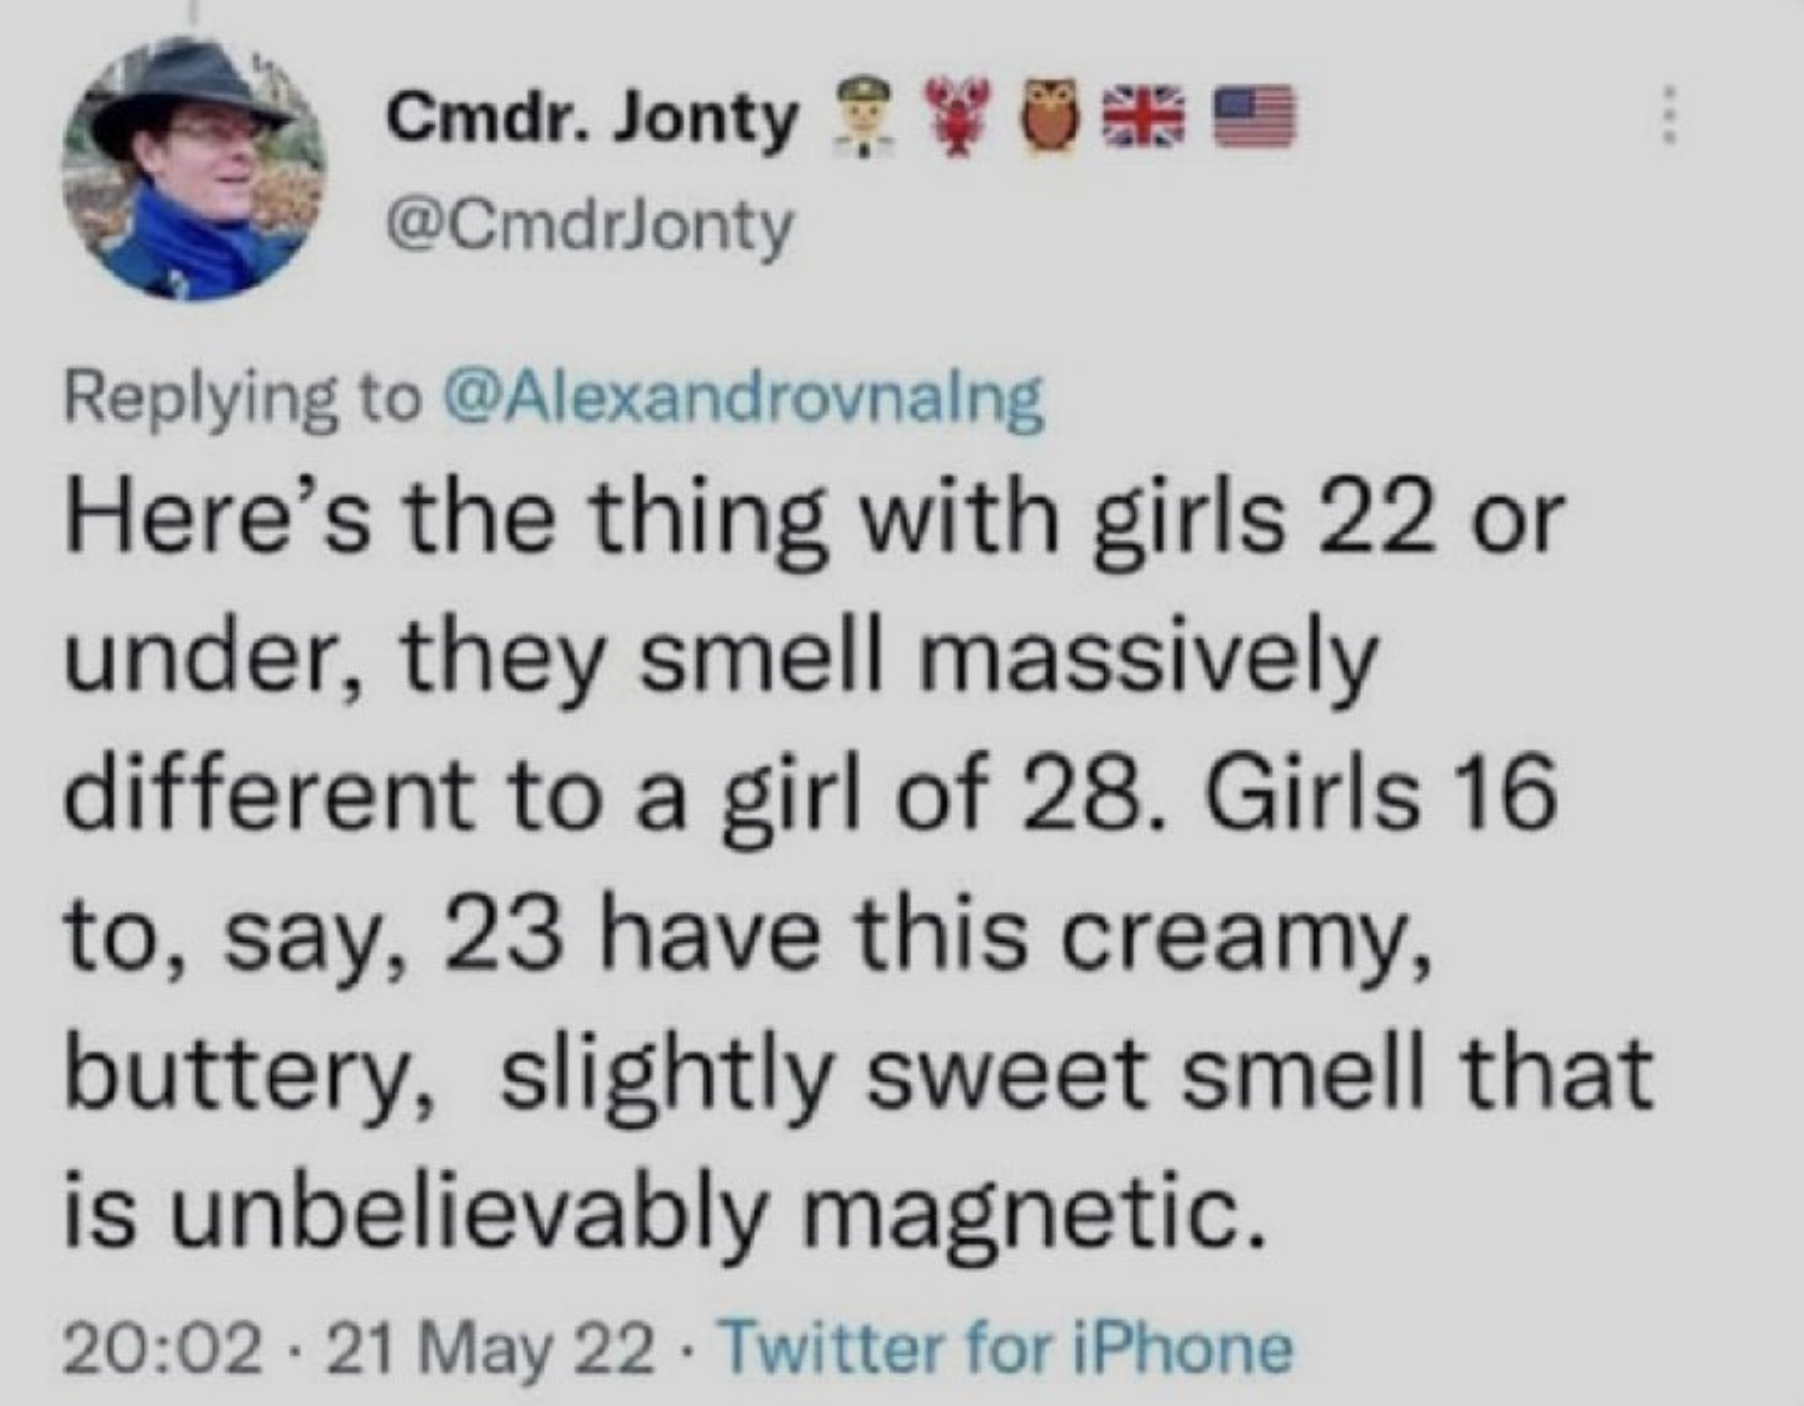 screenshot - Cmdr. Jonty Here's the thing with girls 22 or under, they smell massively different to a girl of 28. Girls 16 to, say, 23 have this creamy, buttery, slightly sweet smell that is unbelievably magnetic. 21 May 22 Twitter for iPhone .